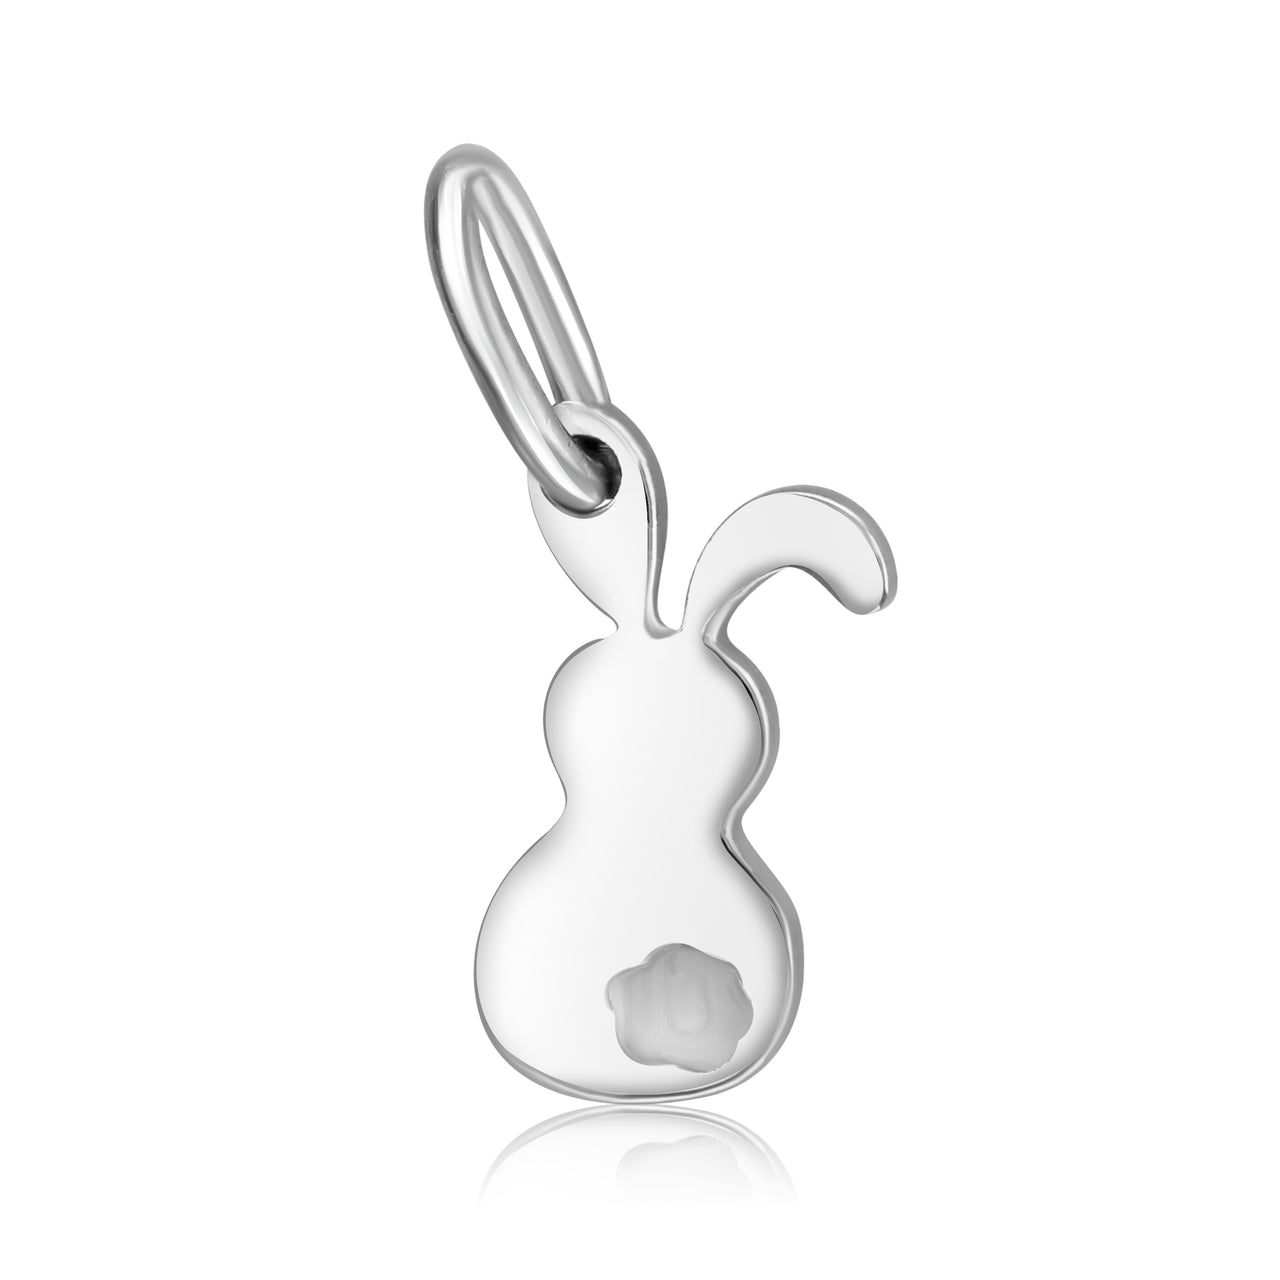 Silver Bunny charm with pearlescent enamel